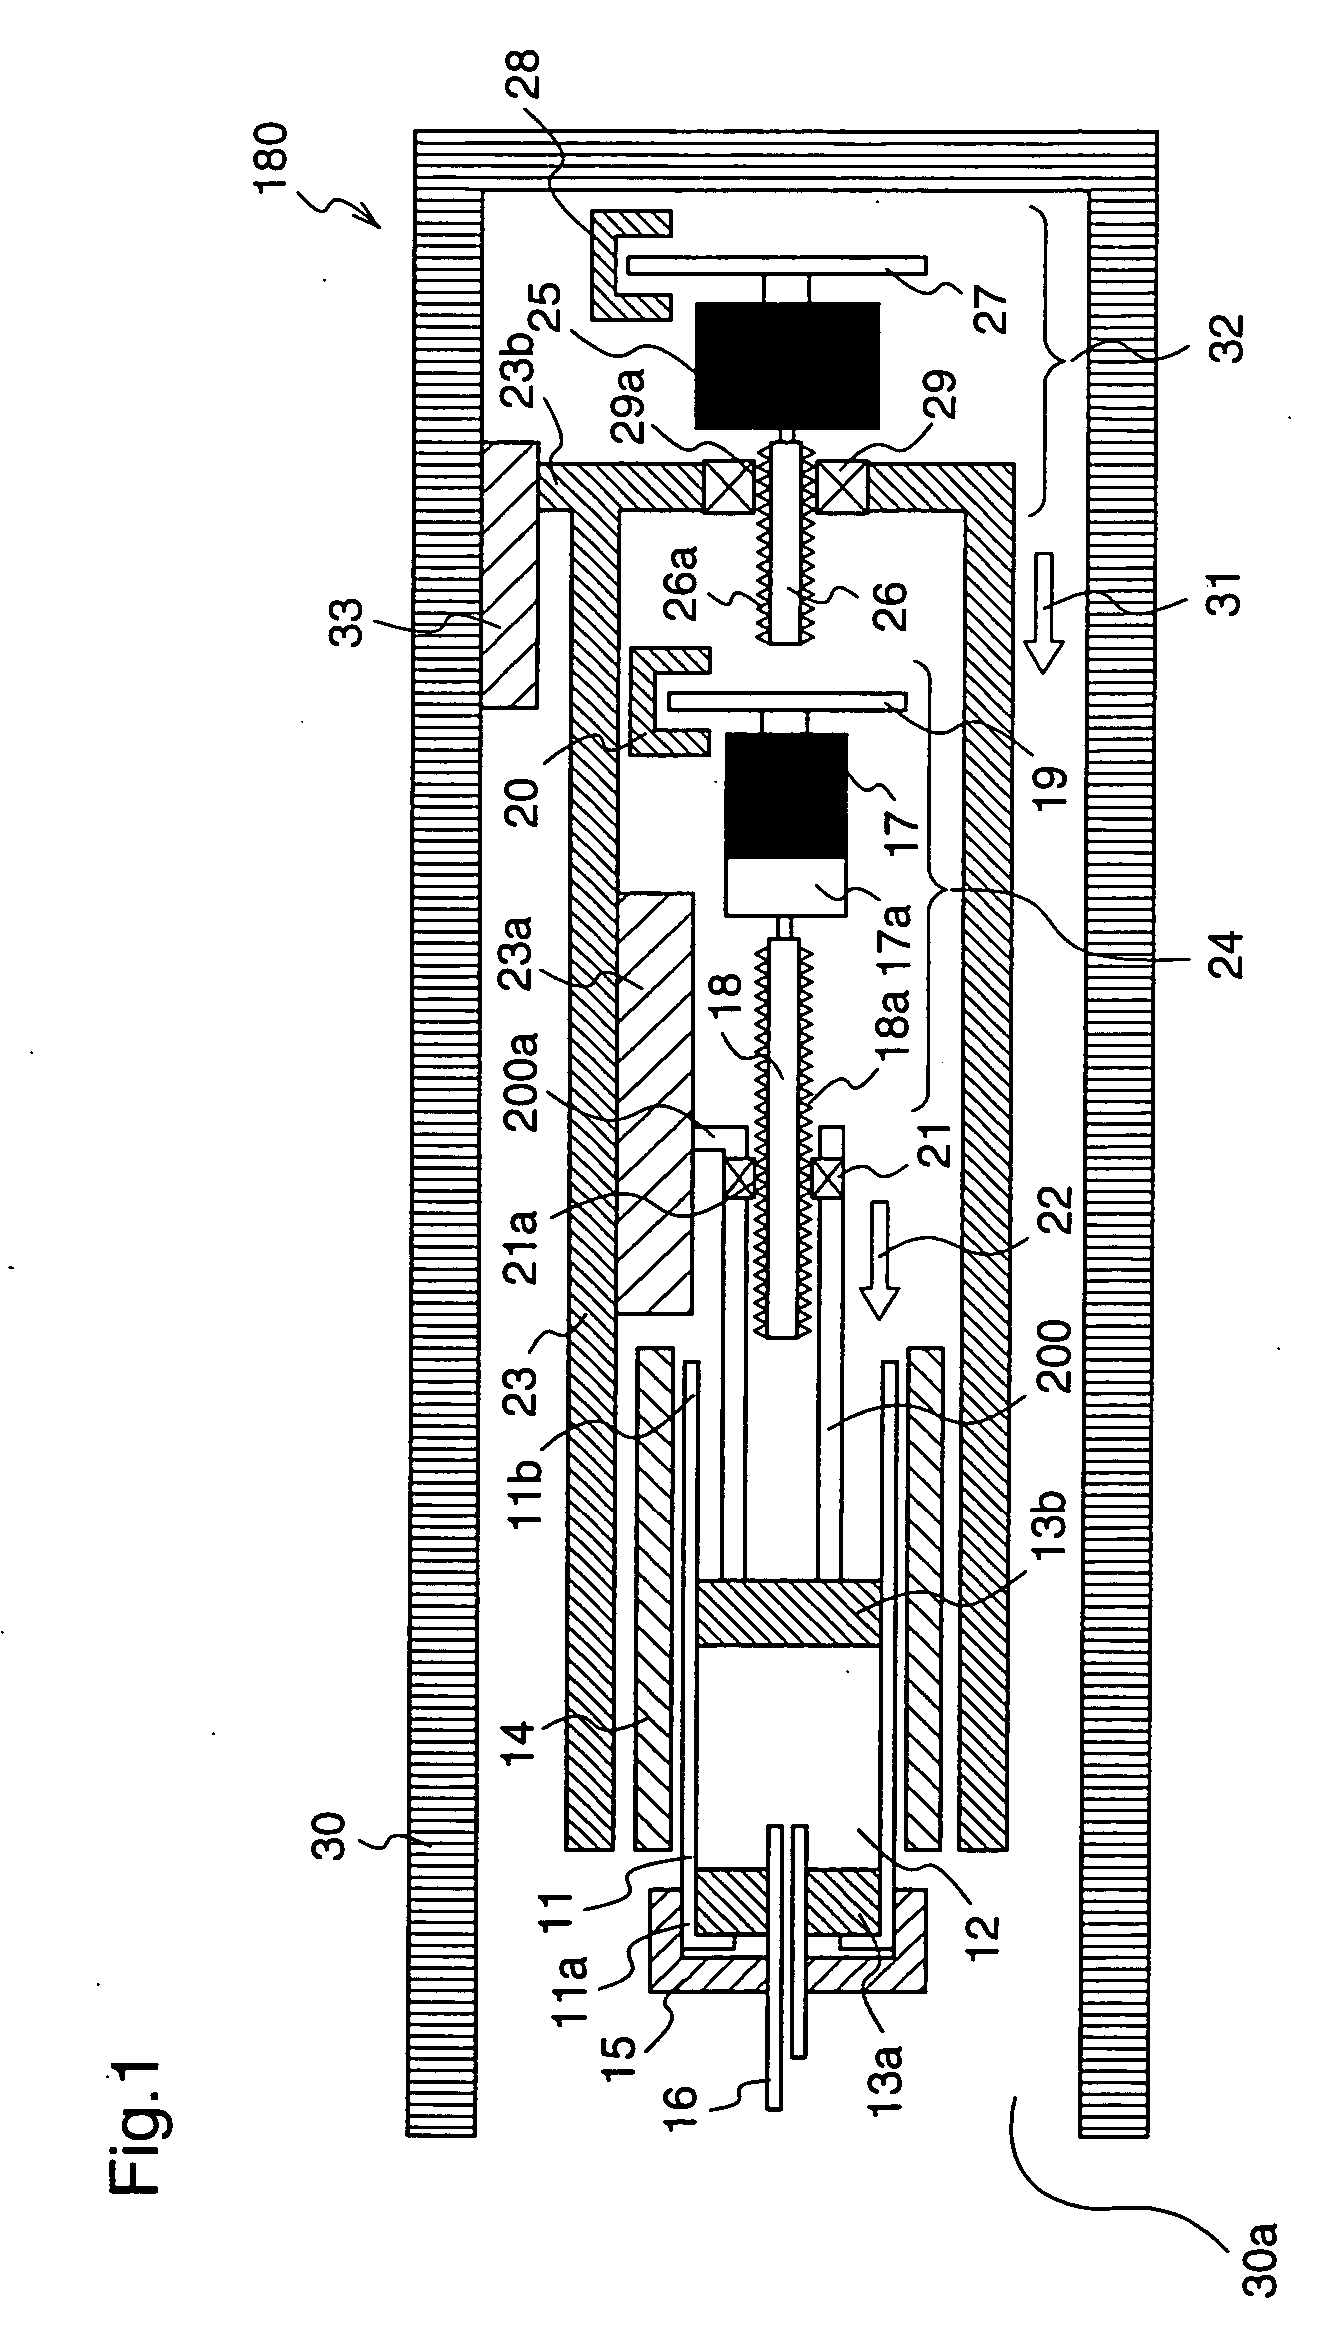 Injection device with puncture function, method for controlling injection device with puncture function, chemical solution administration device, and method for controlling chemical solution administration device